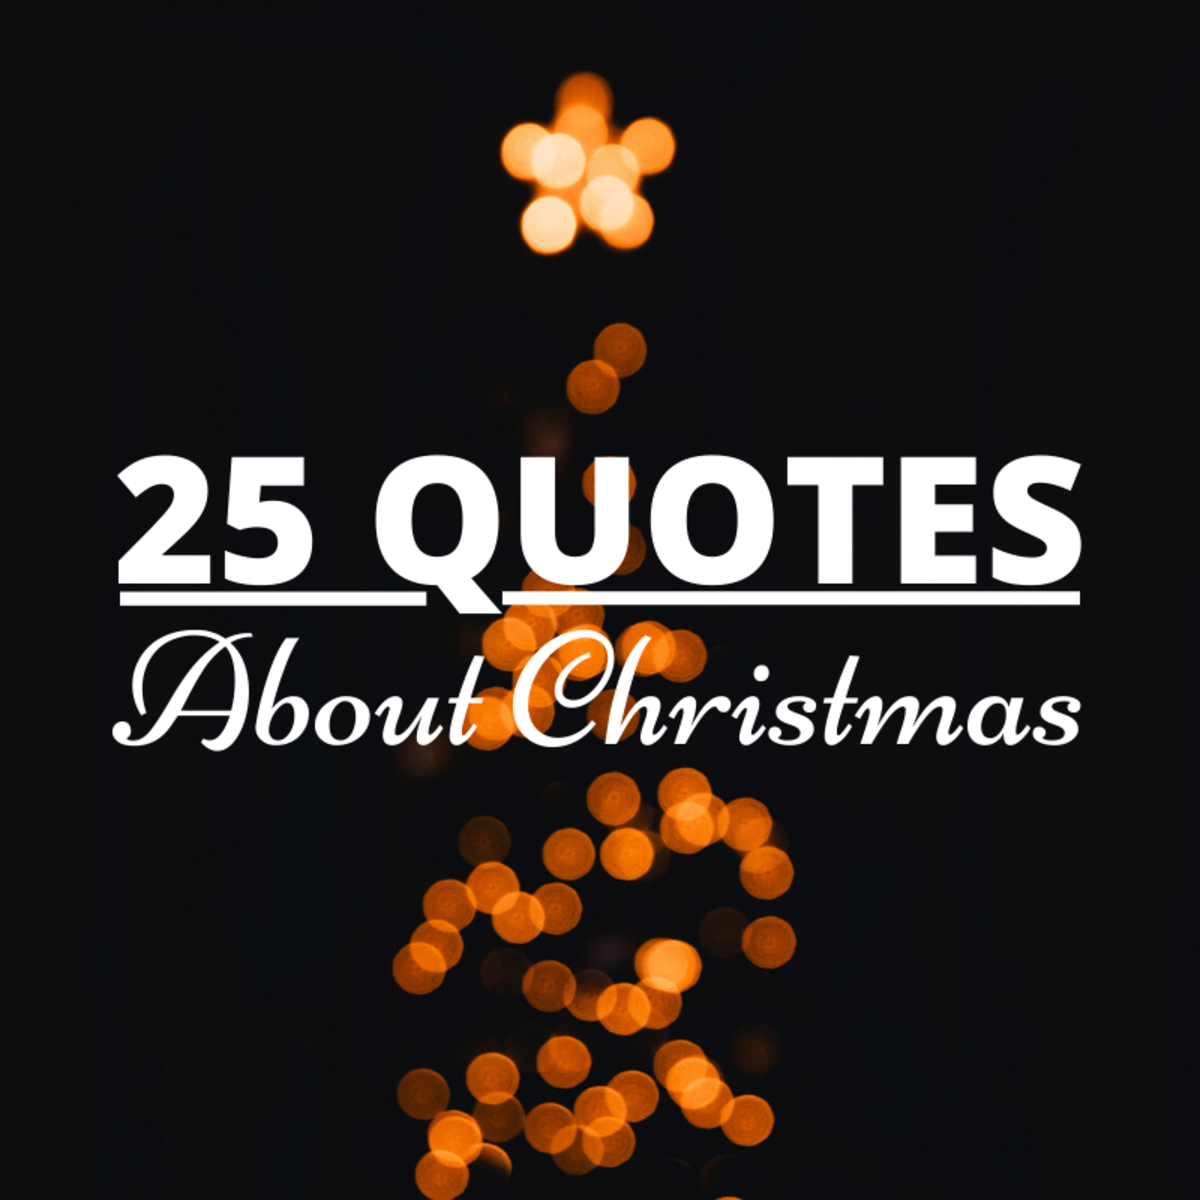 Funny, Sincere, and Unique Quotations About Christmas - Holidappy